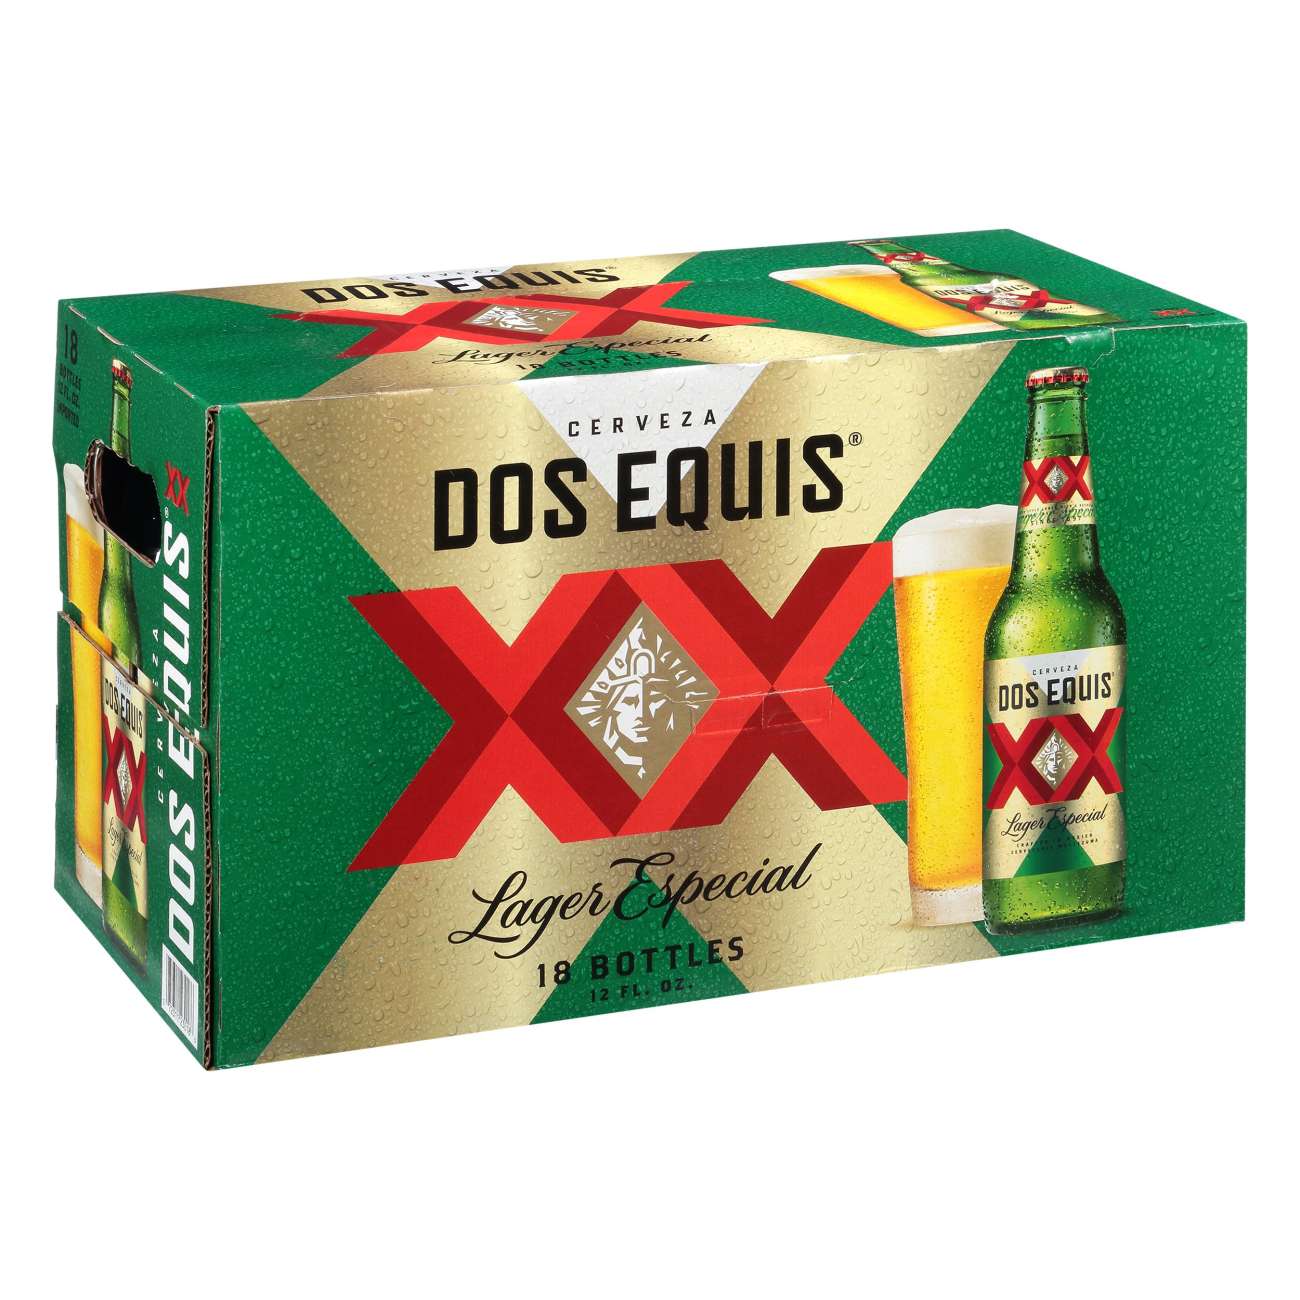 Dos Equis Lager Especial Beer 12 Oz